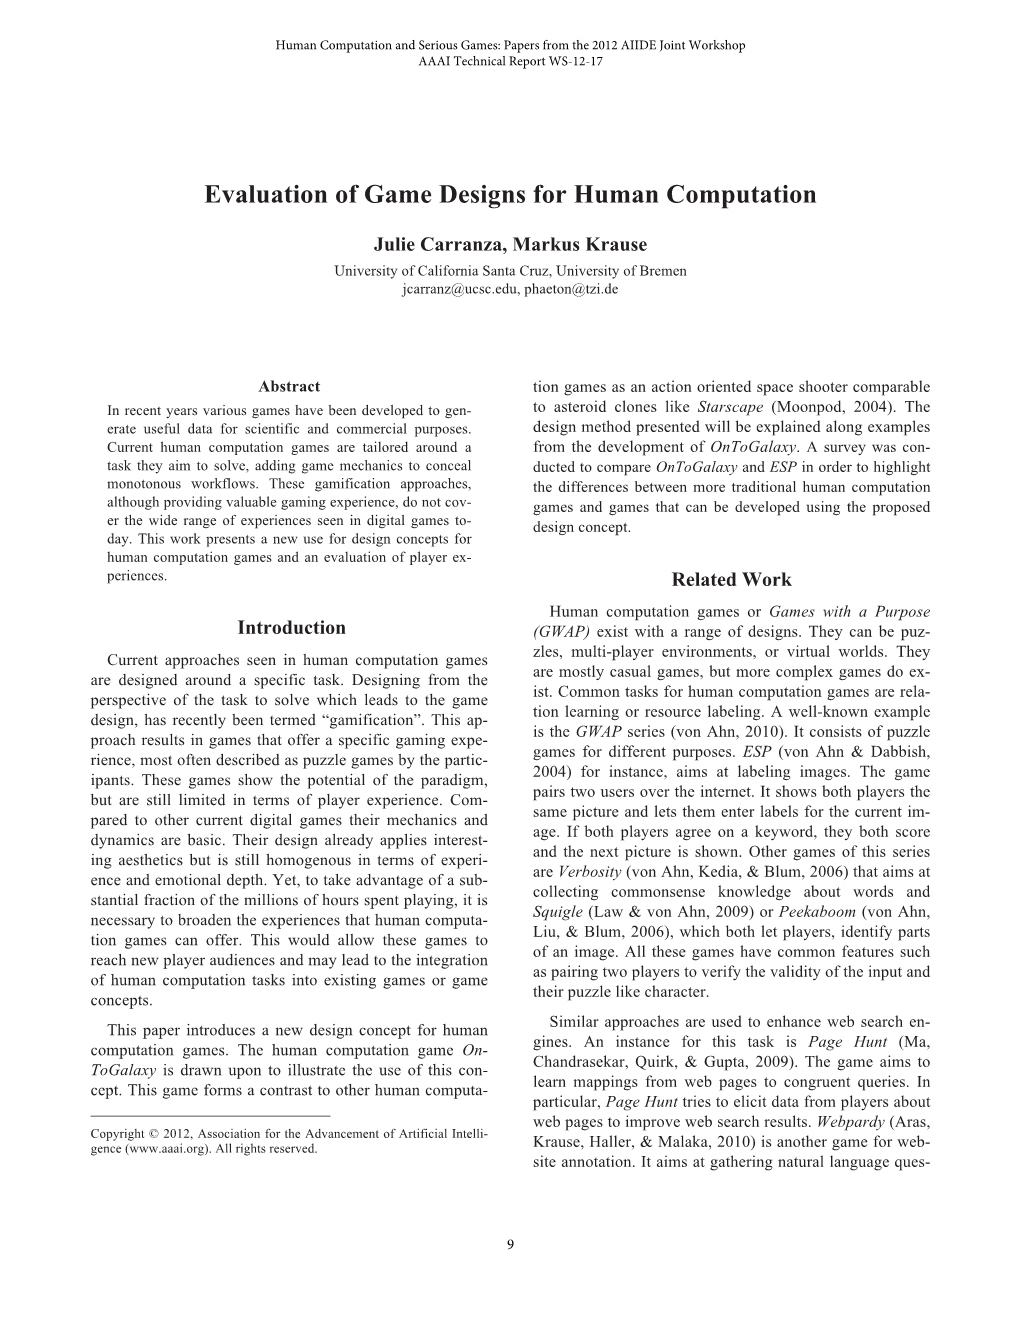 Evaluation of Game Designs for Human Computation